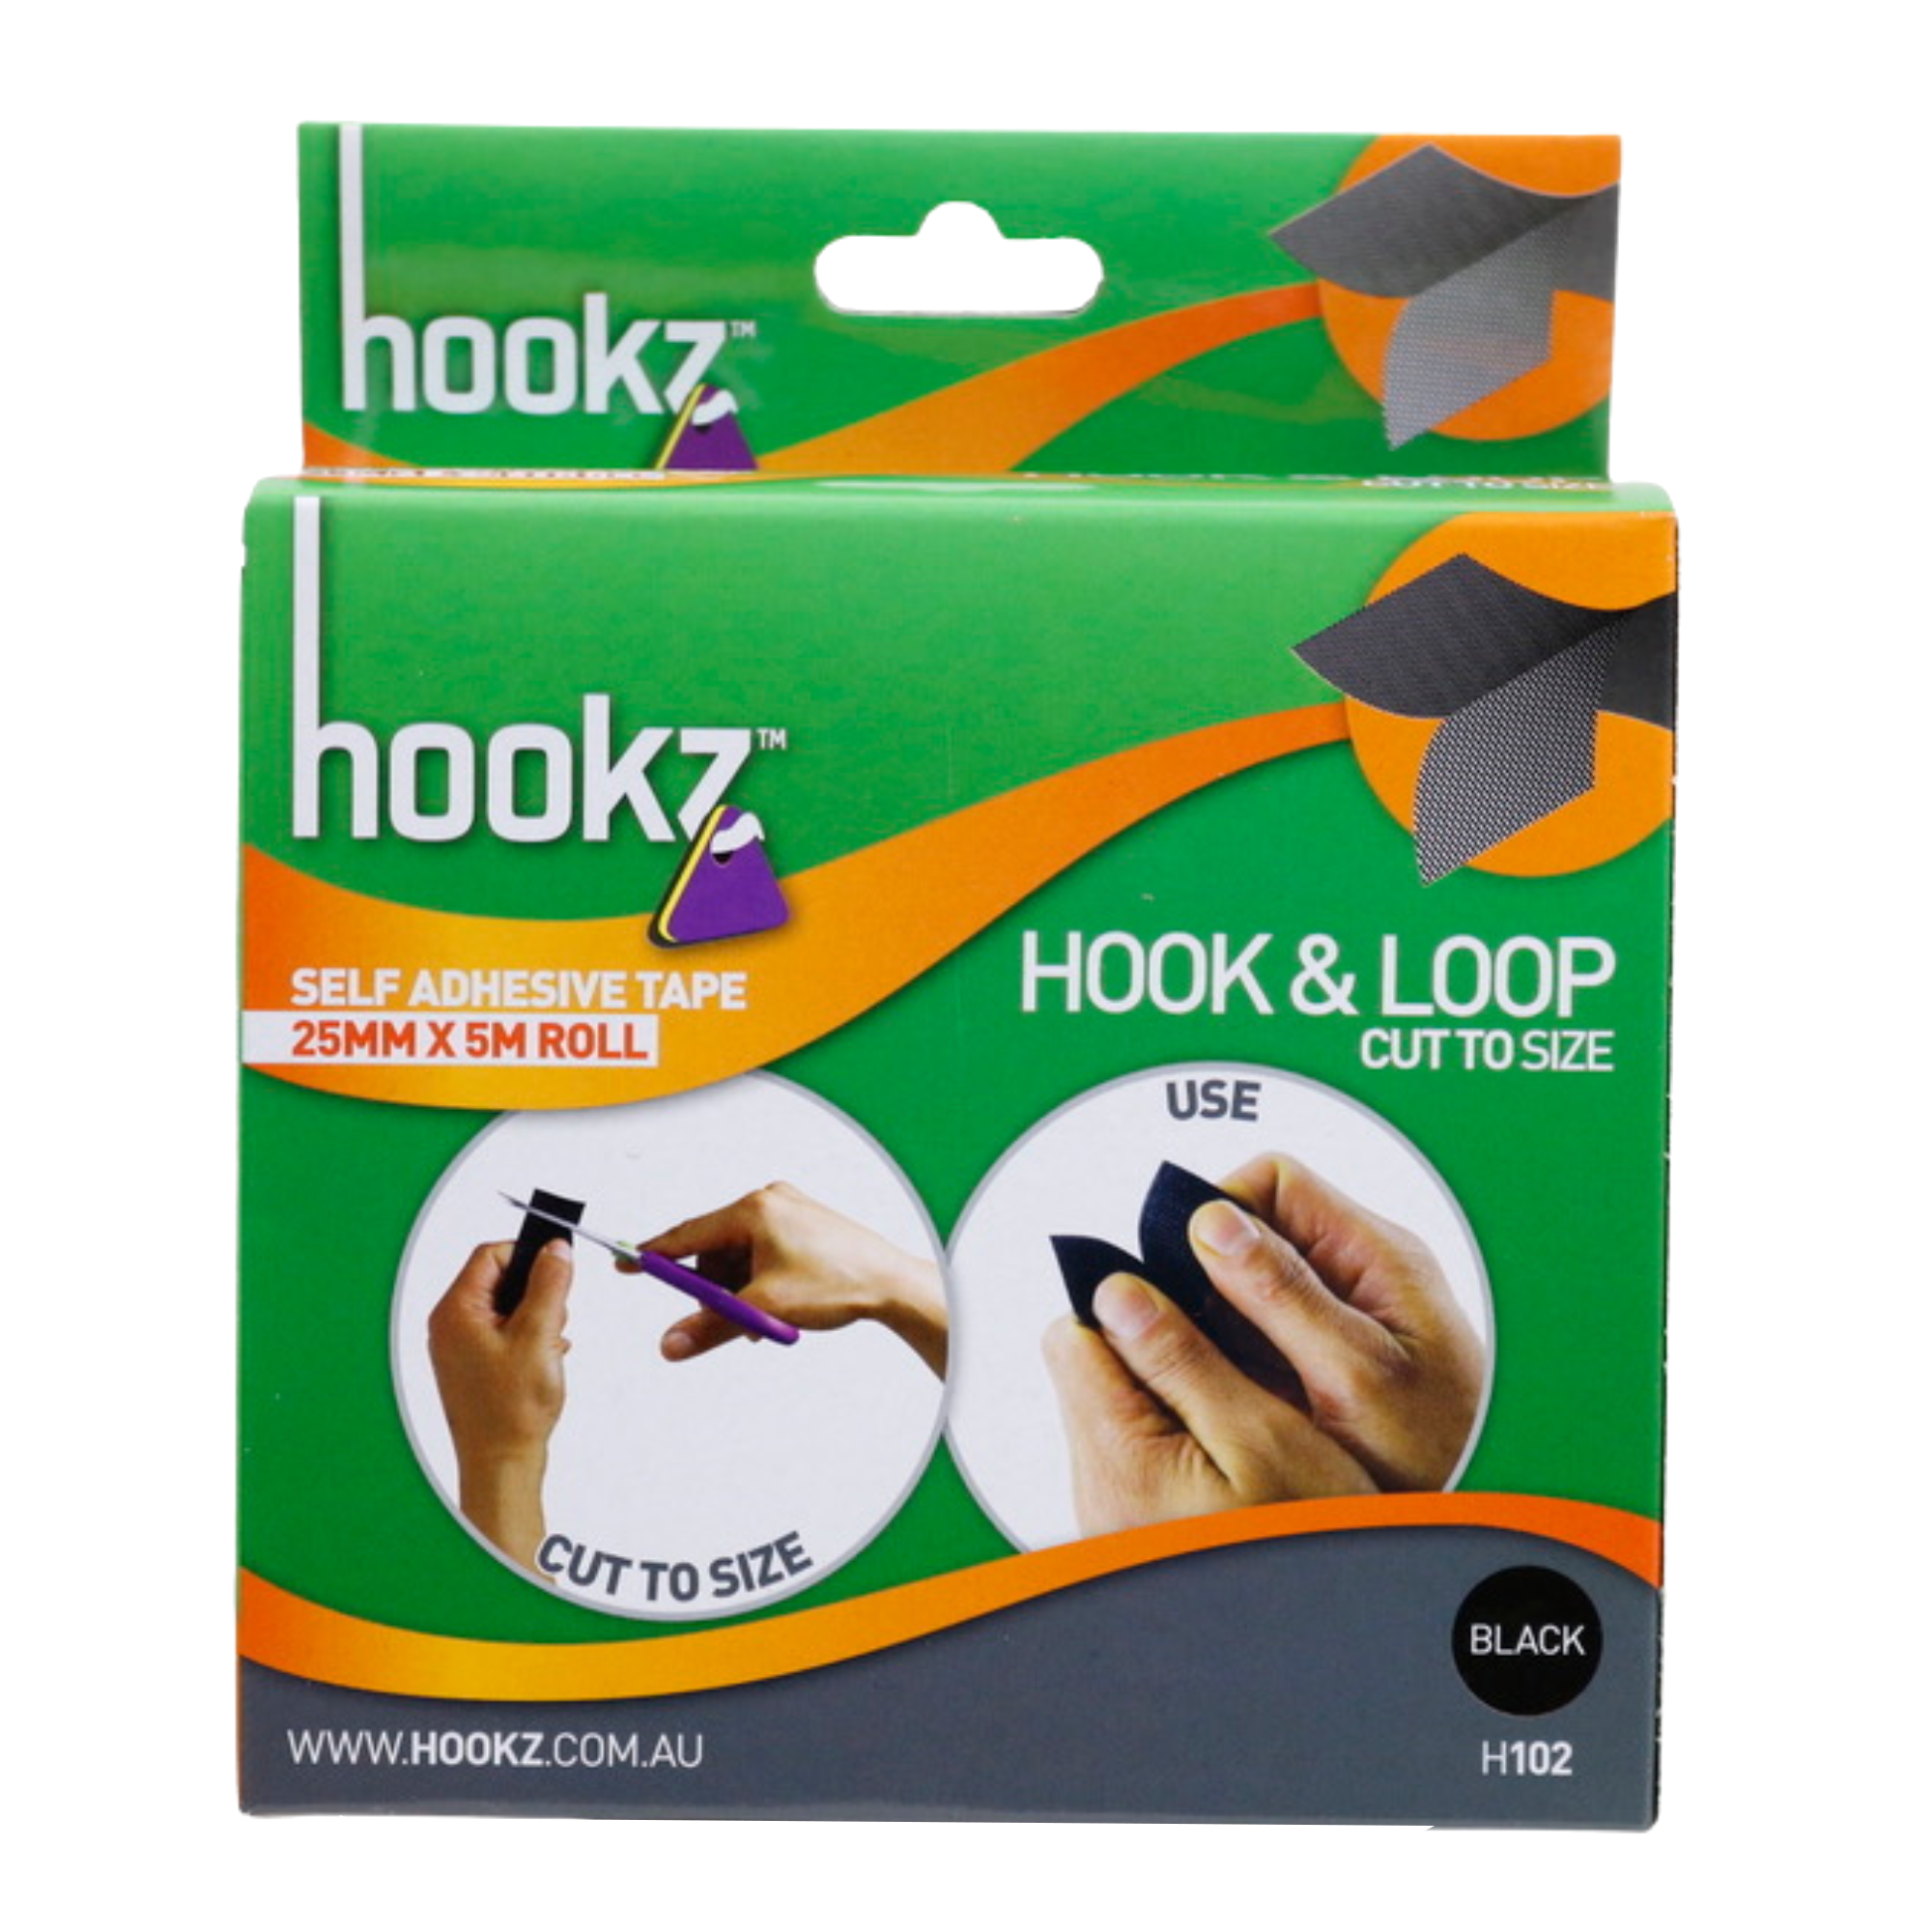 Hook & Loop Tape 5m Roll - Hookz permanent and removable hanging